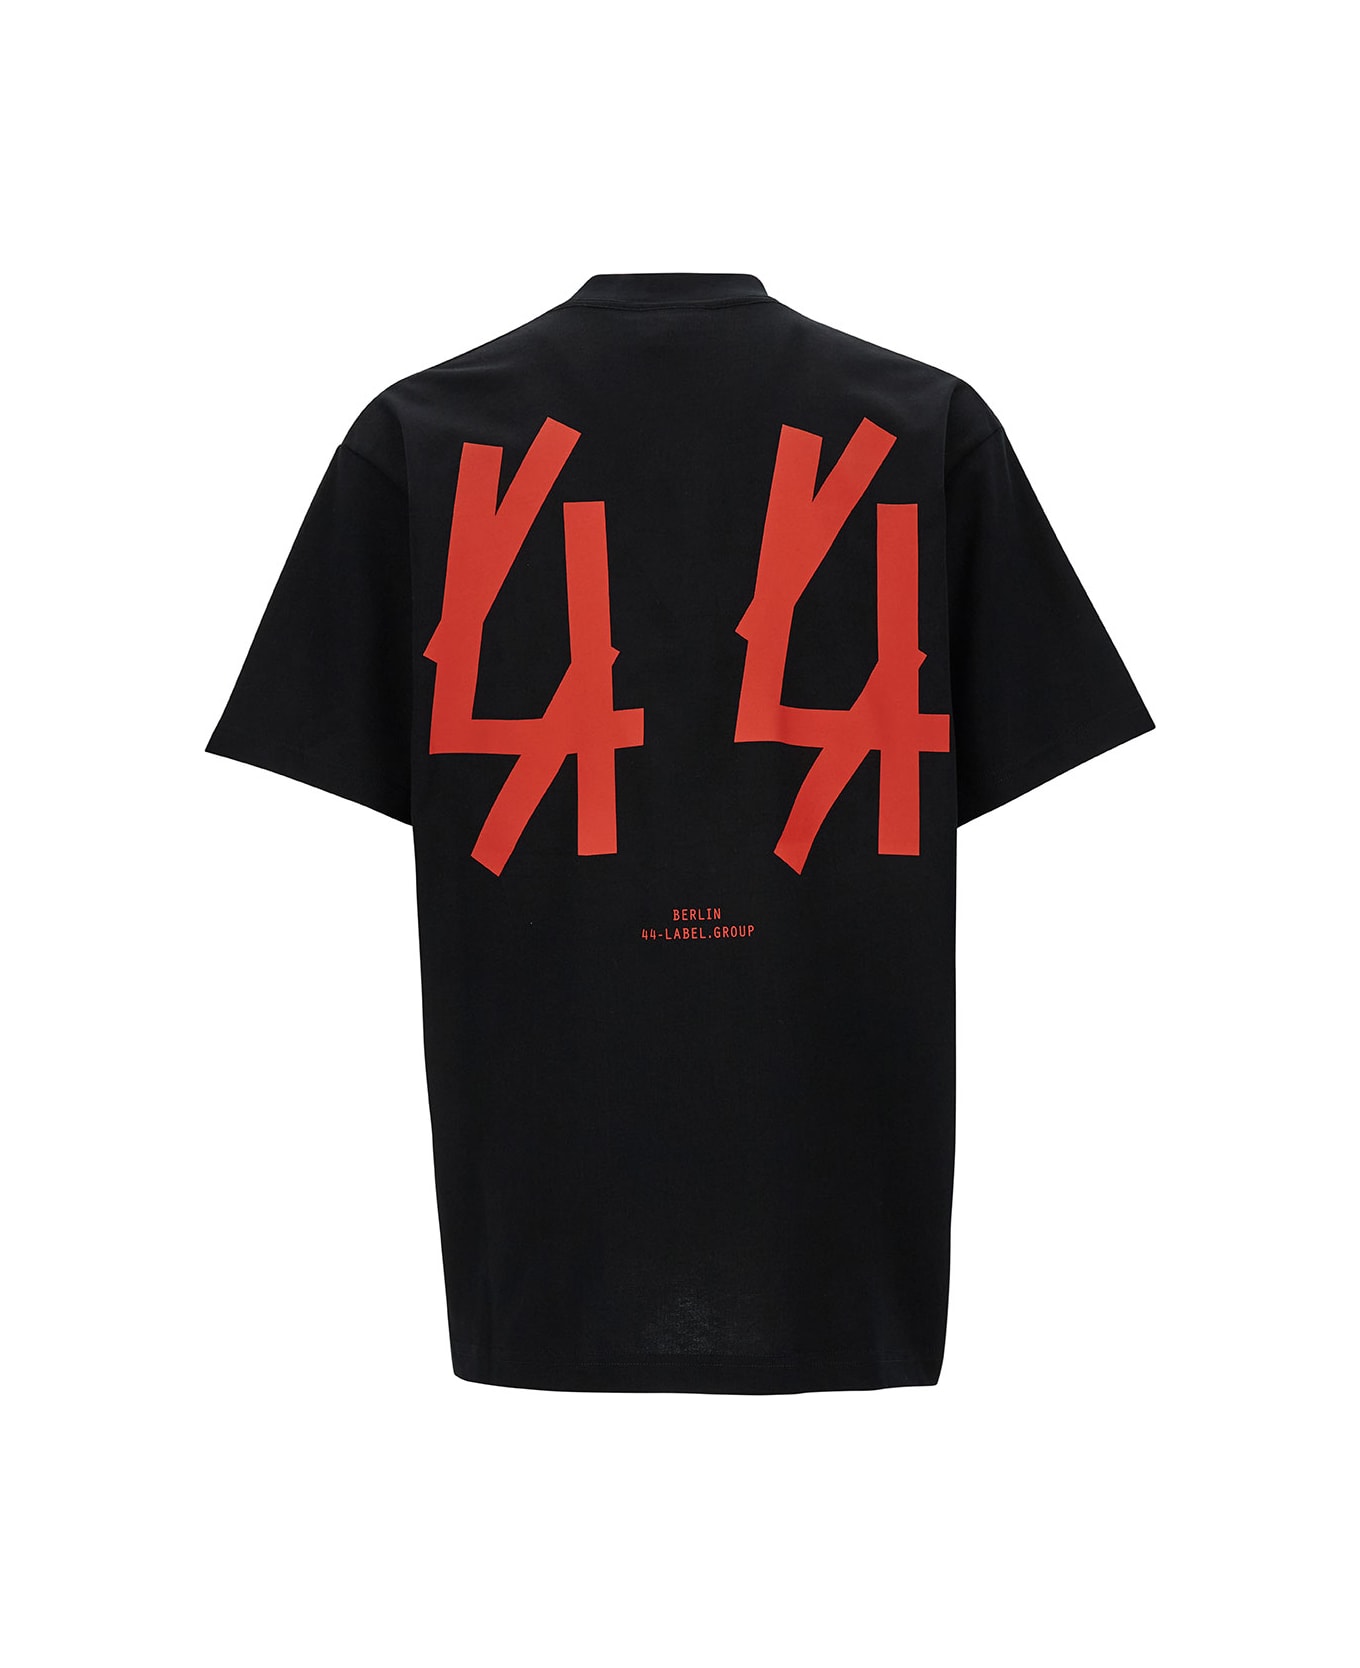 44 Label Group Black T-shirt With Logo Embroidery And Print In Cotton Man - Black